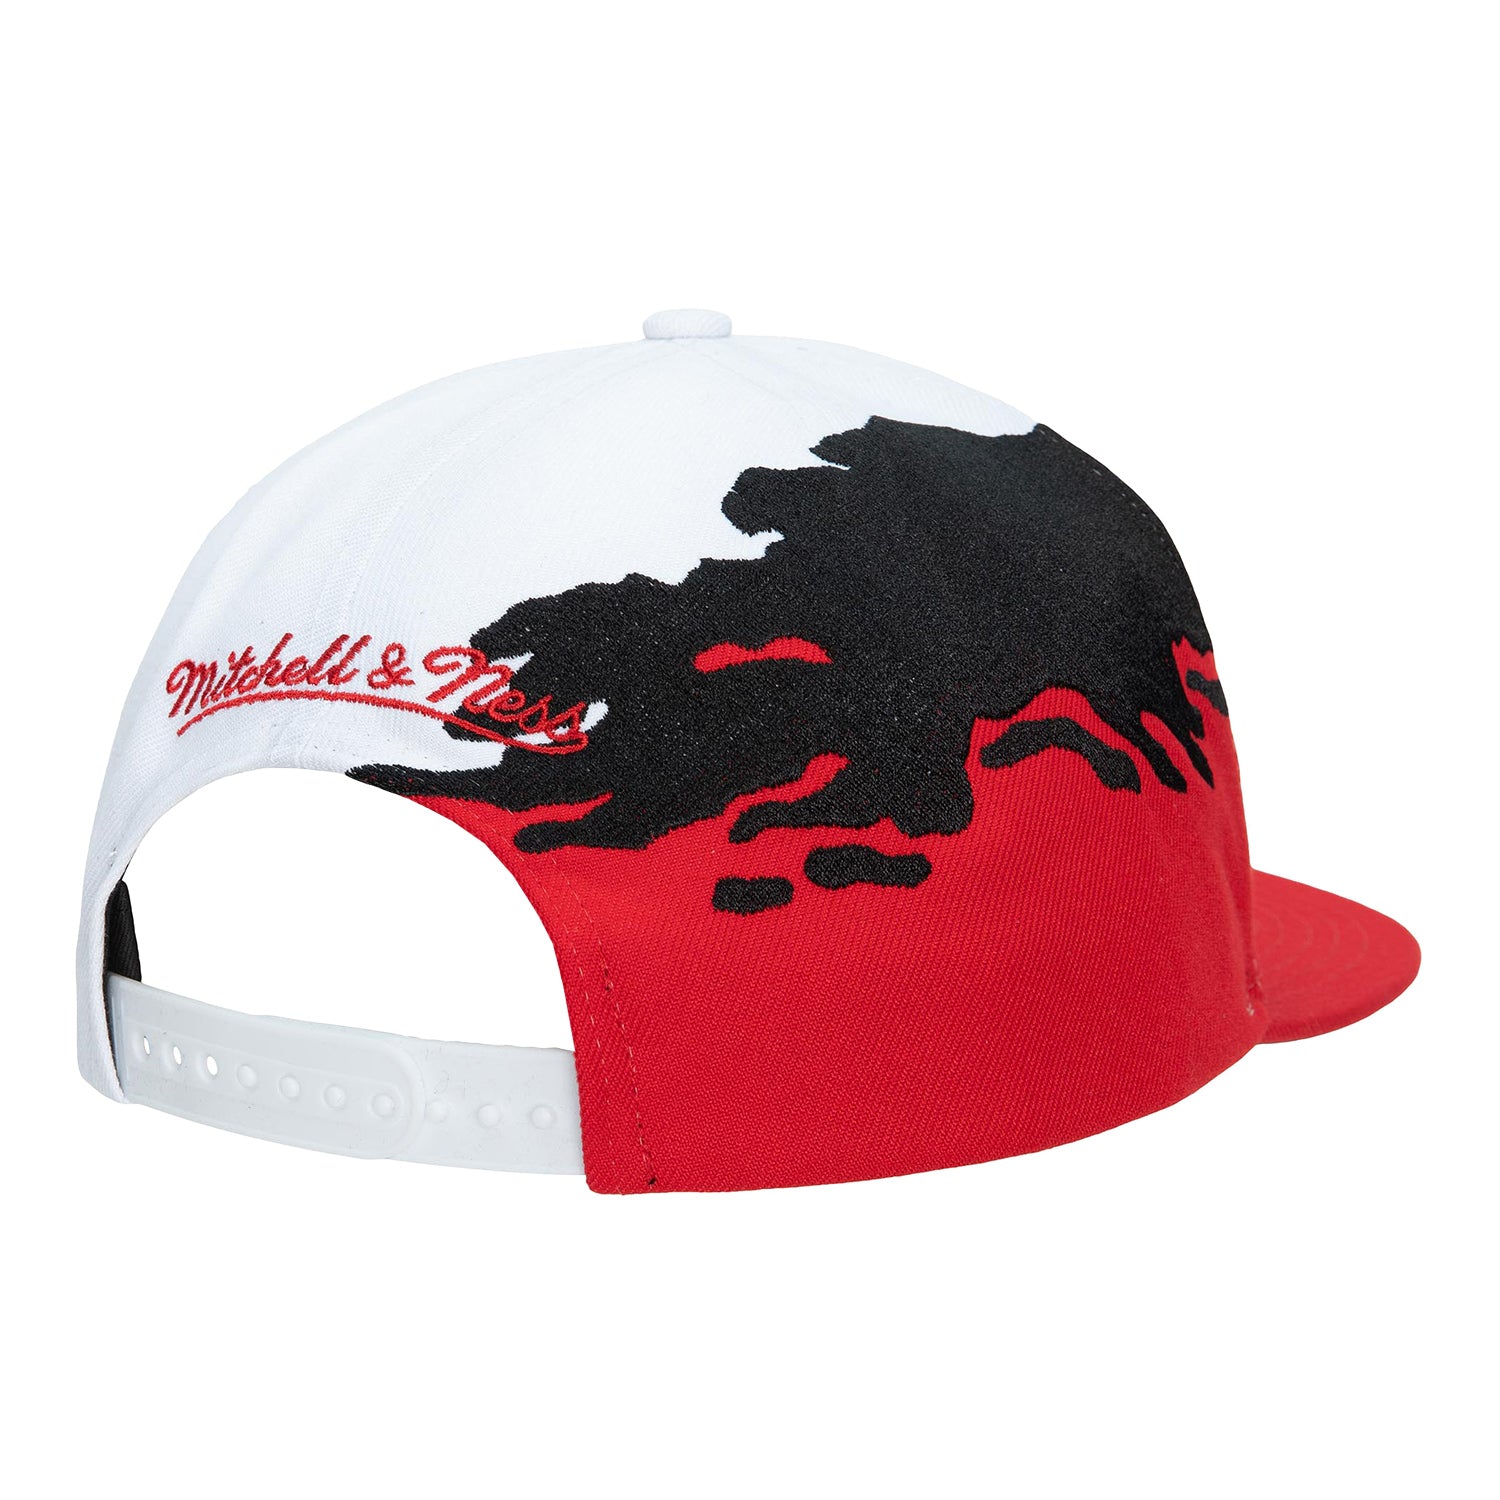 Mitchell & Ness BACK TO 93 FITTED CHICAGO BULLS CAP White - WHITE / BLACK